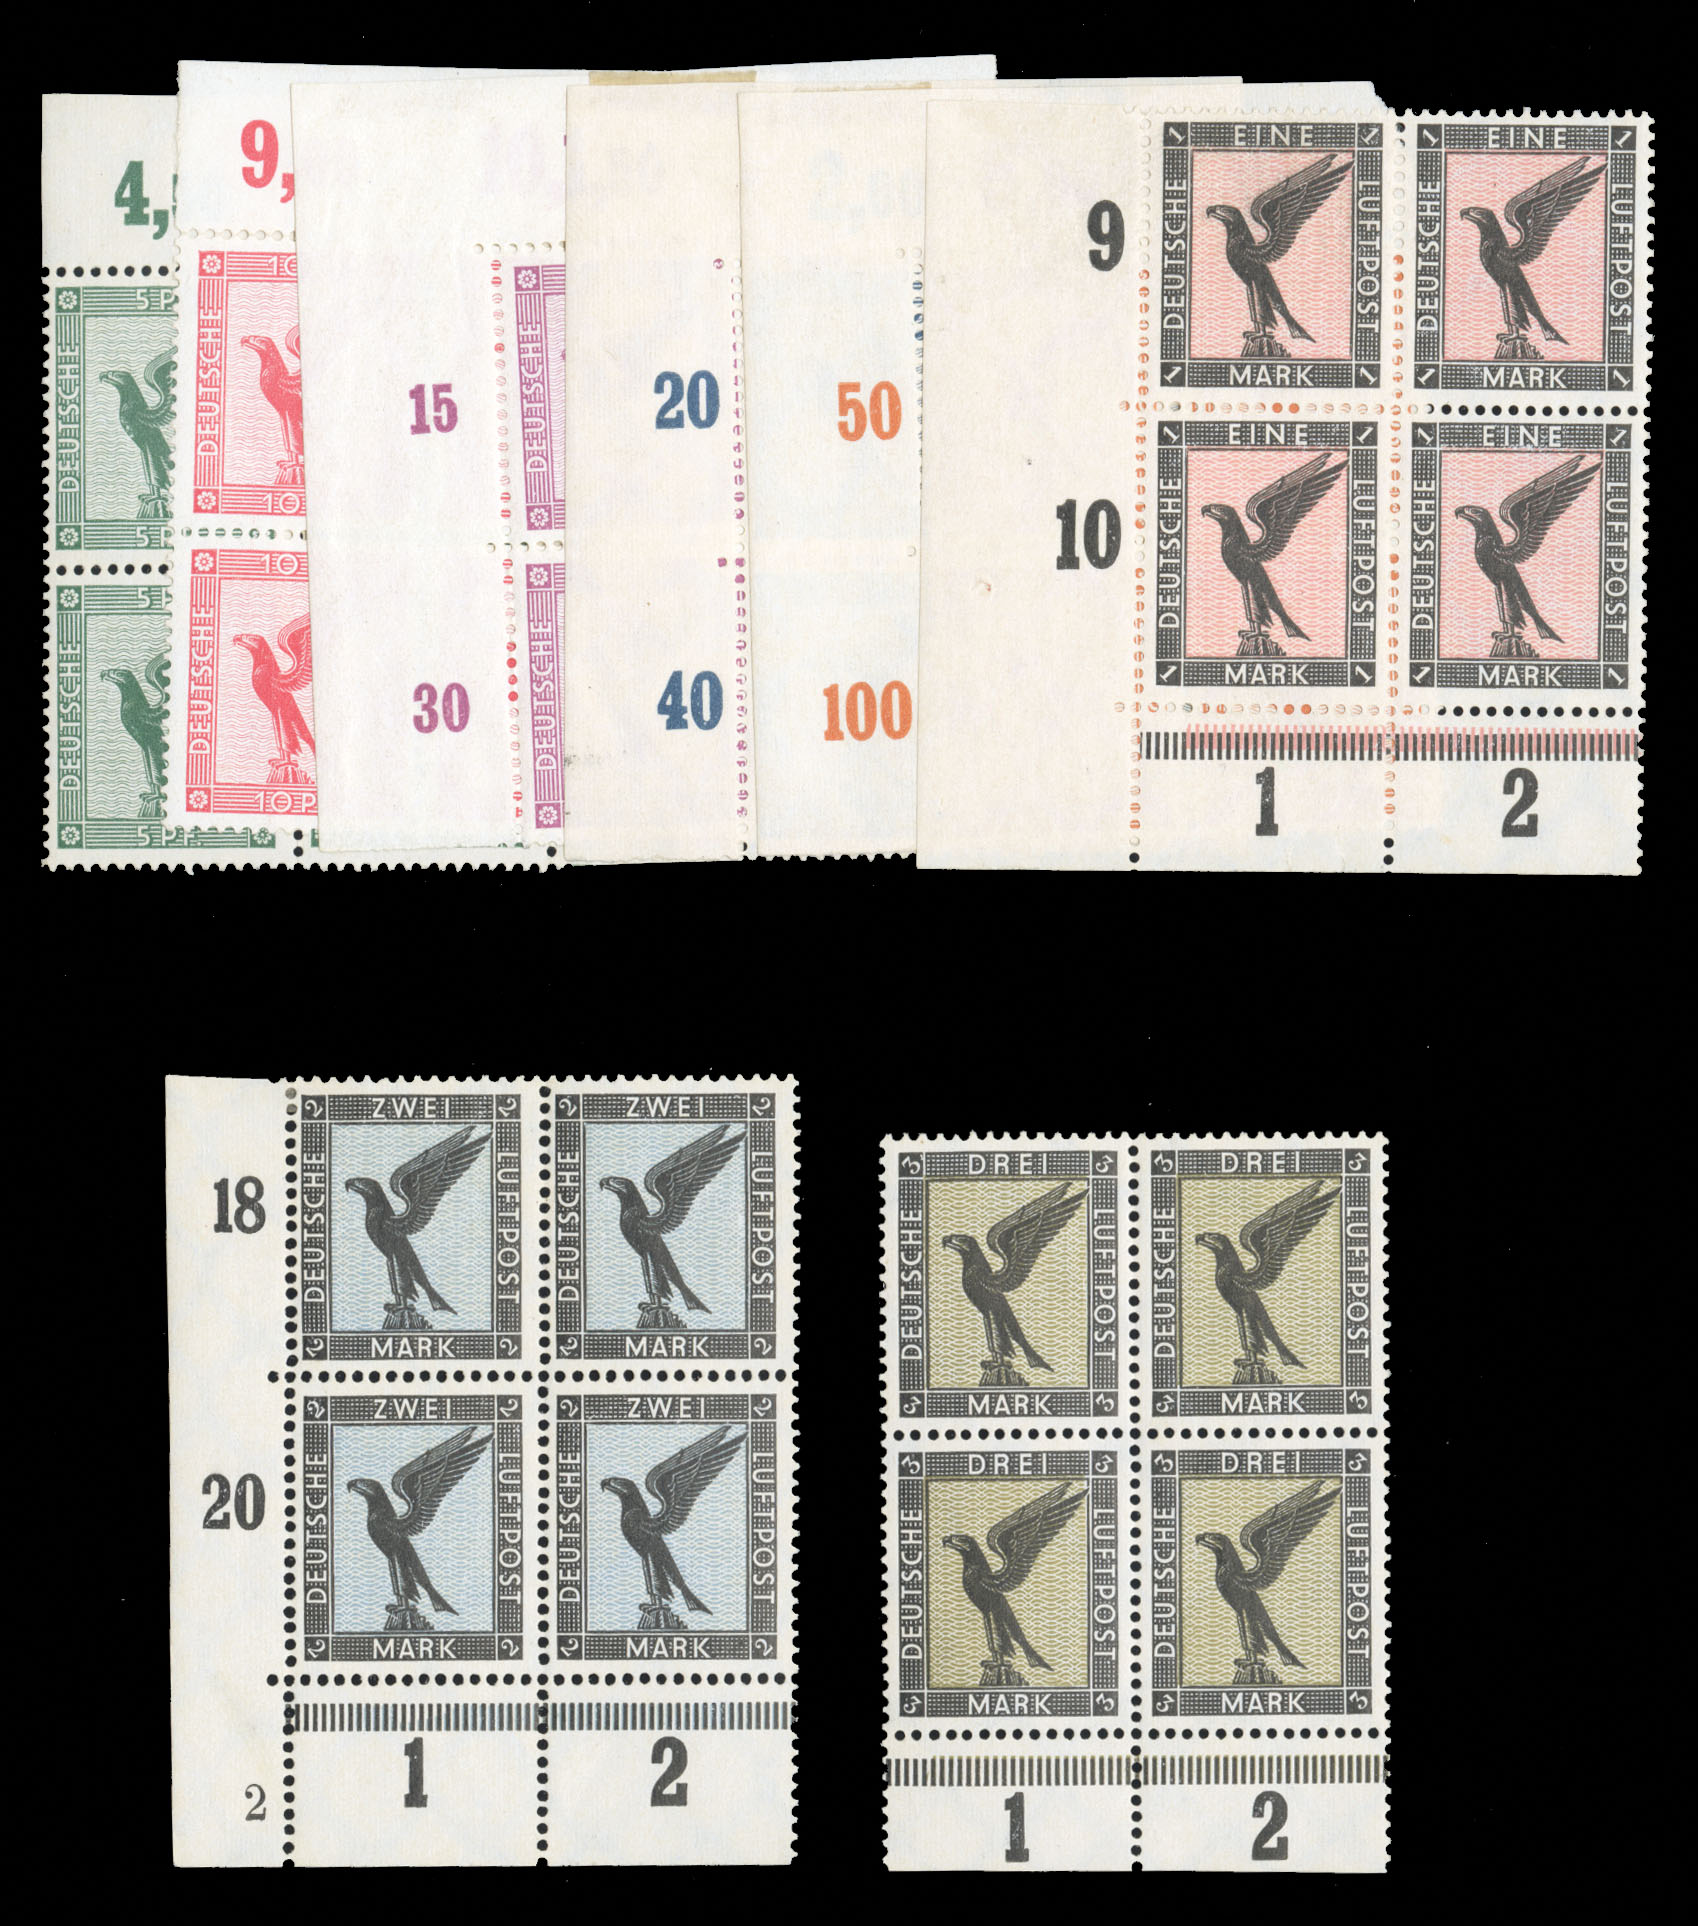 Lot 572 - GREAT BRITAIN British Offices in the Turkish Empire  -  Cherrystone Auctions U.S. & Worldwide Stamps & Postal History